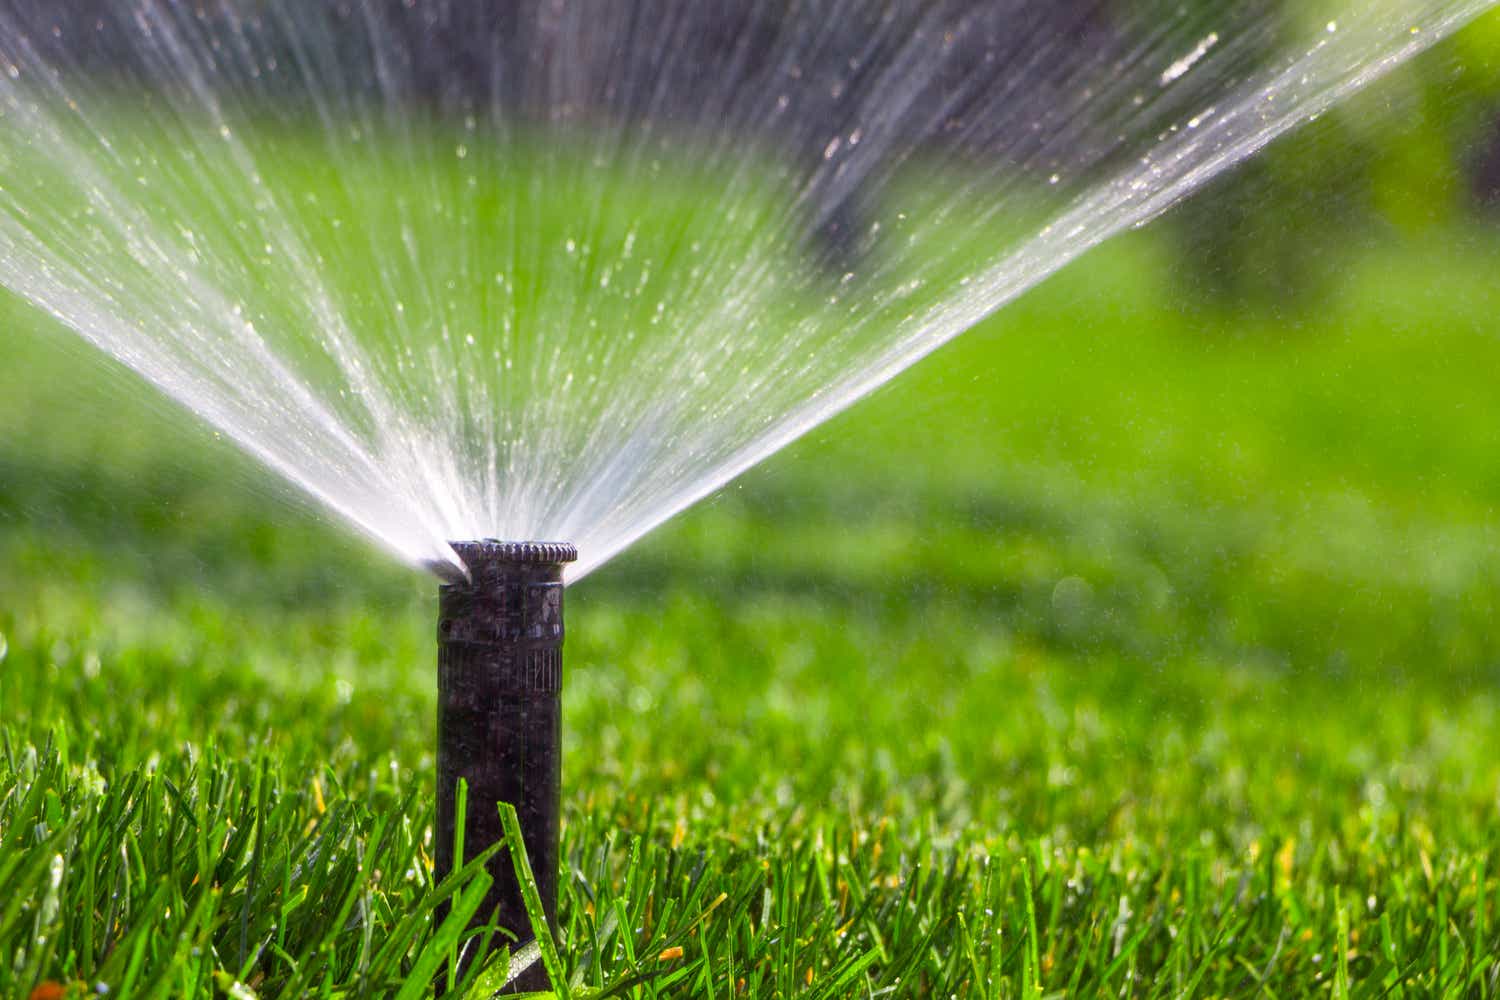 Close-up of an automatic sprinkler system watering the lawn on a background of green grass